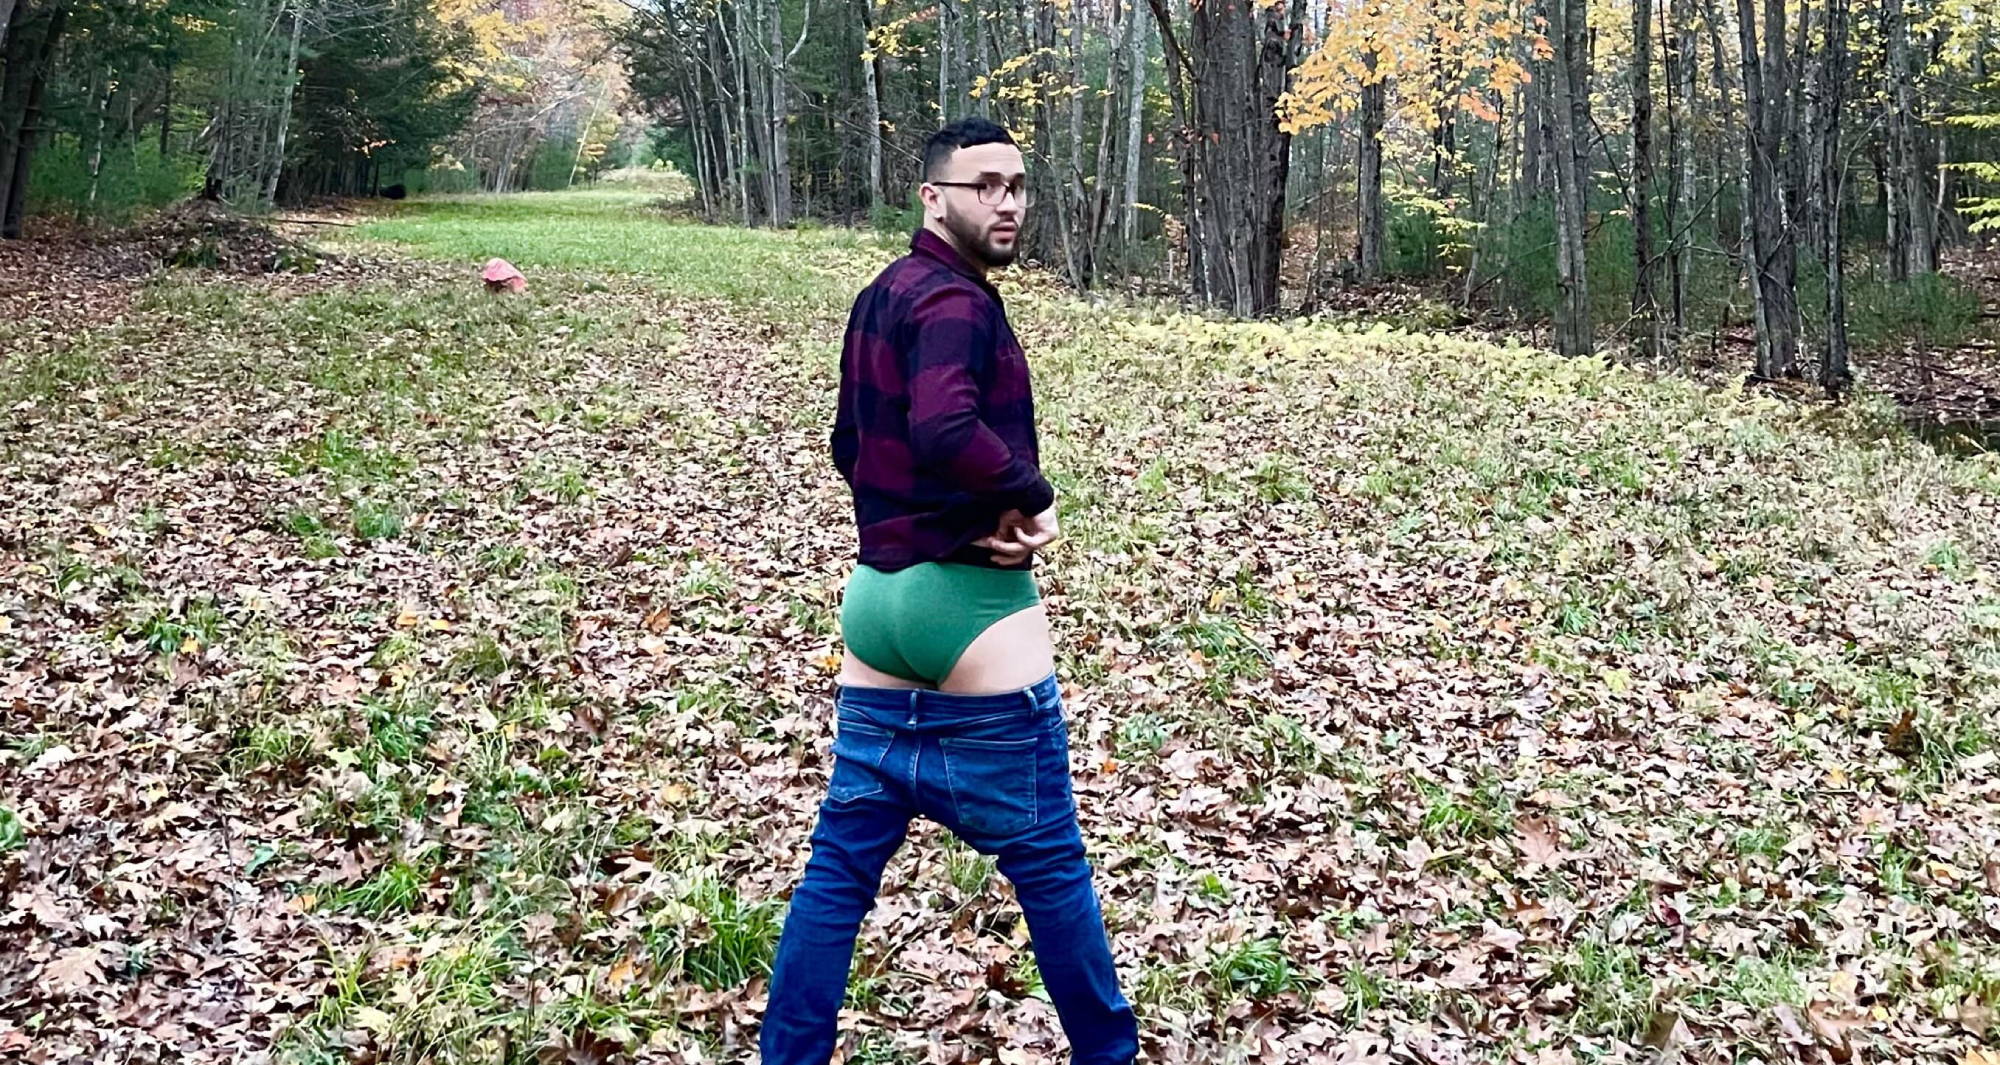 man from behind wearing a flannel and jeans pulled down exposing his green briefs undies